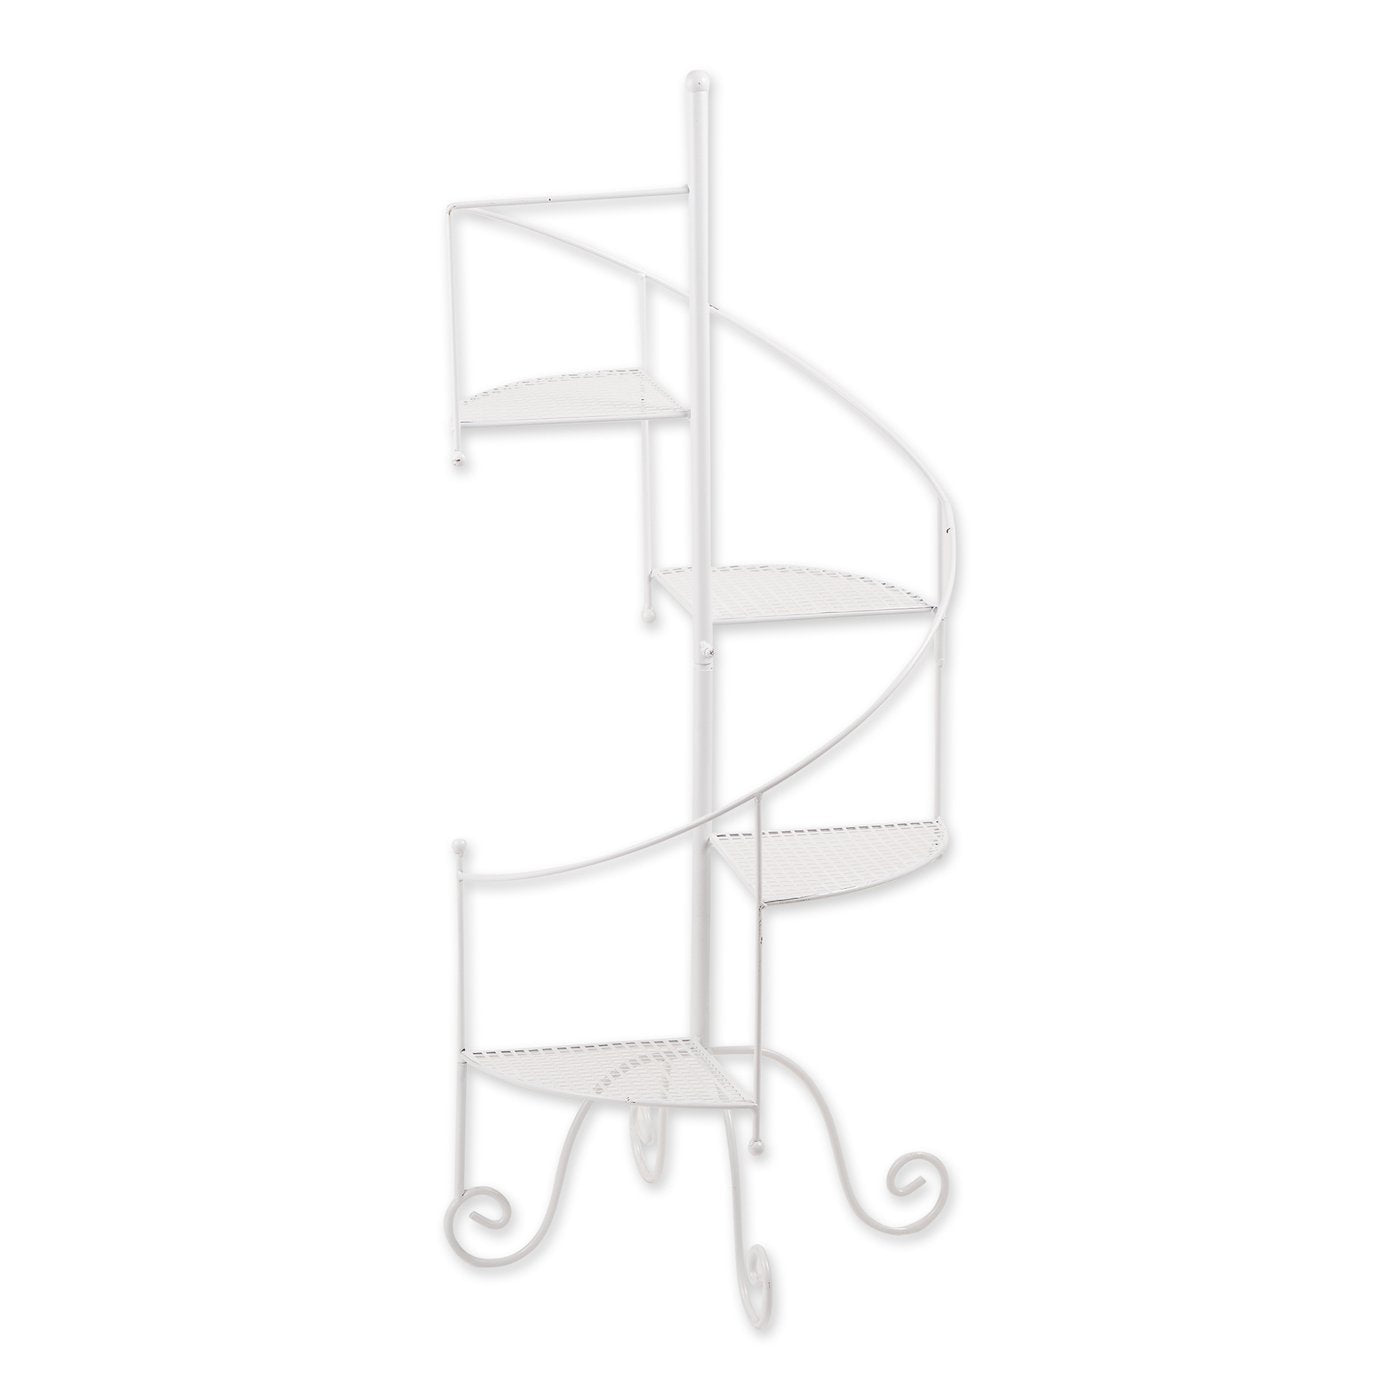 Iron Spiral Staircase Plant Stand - White Summerfield Terrace